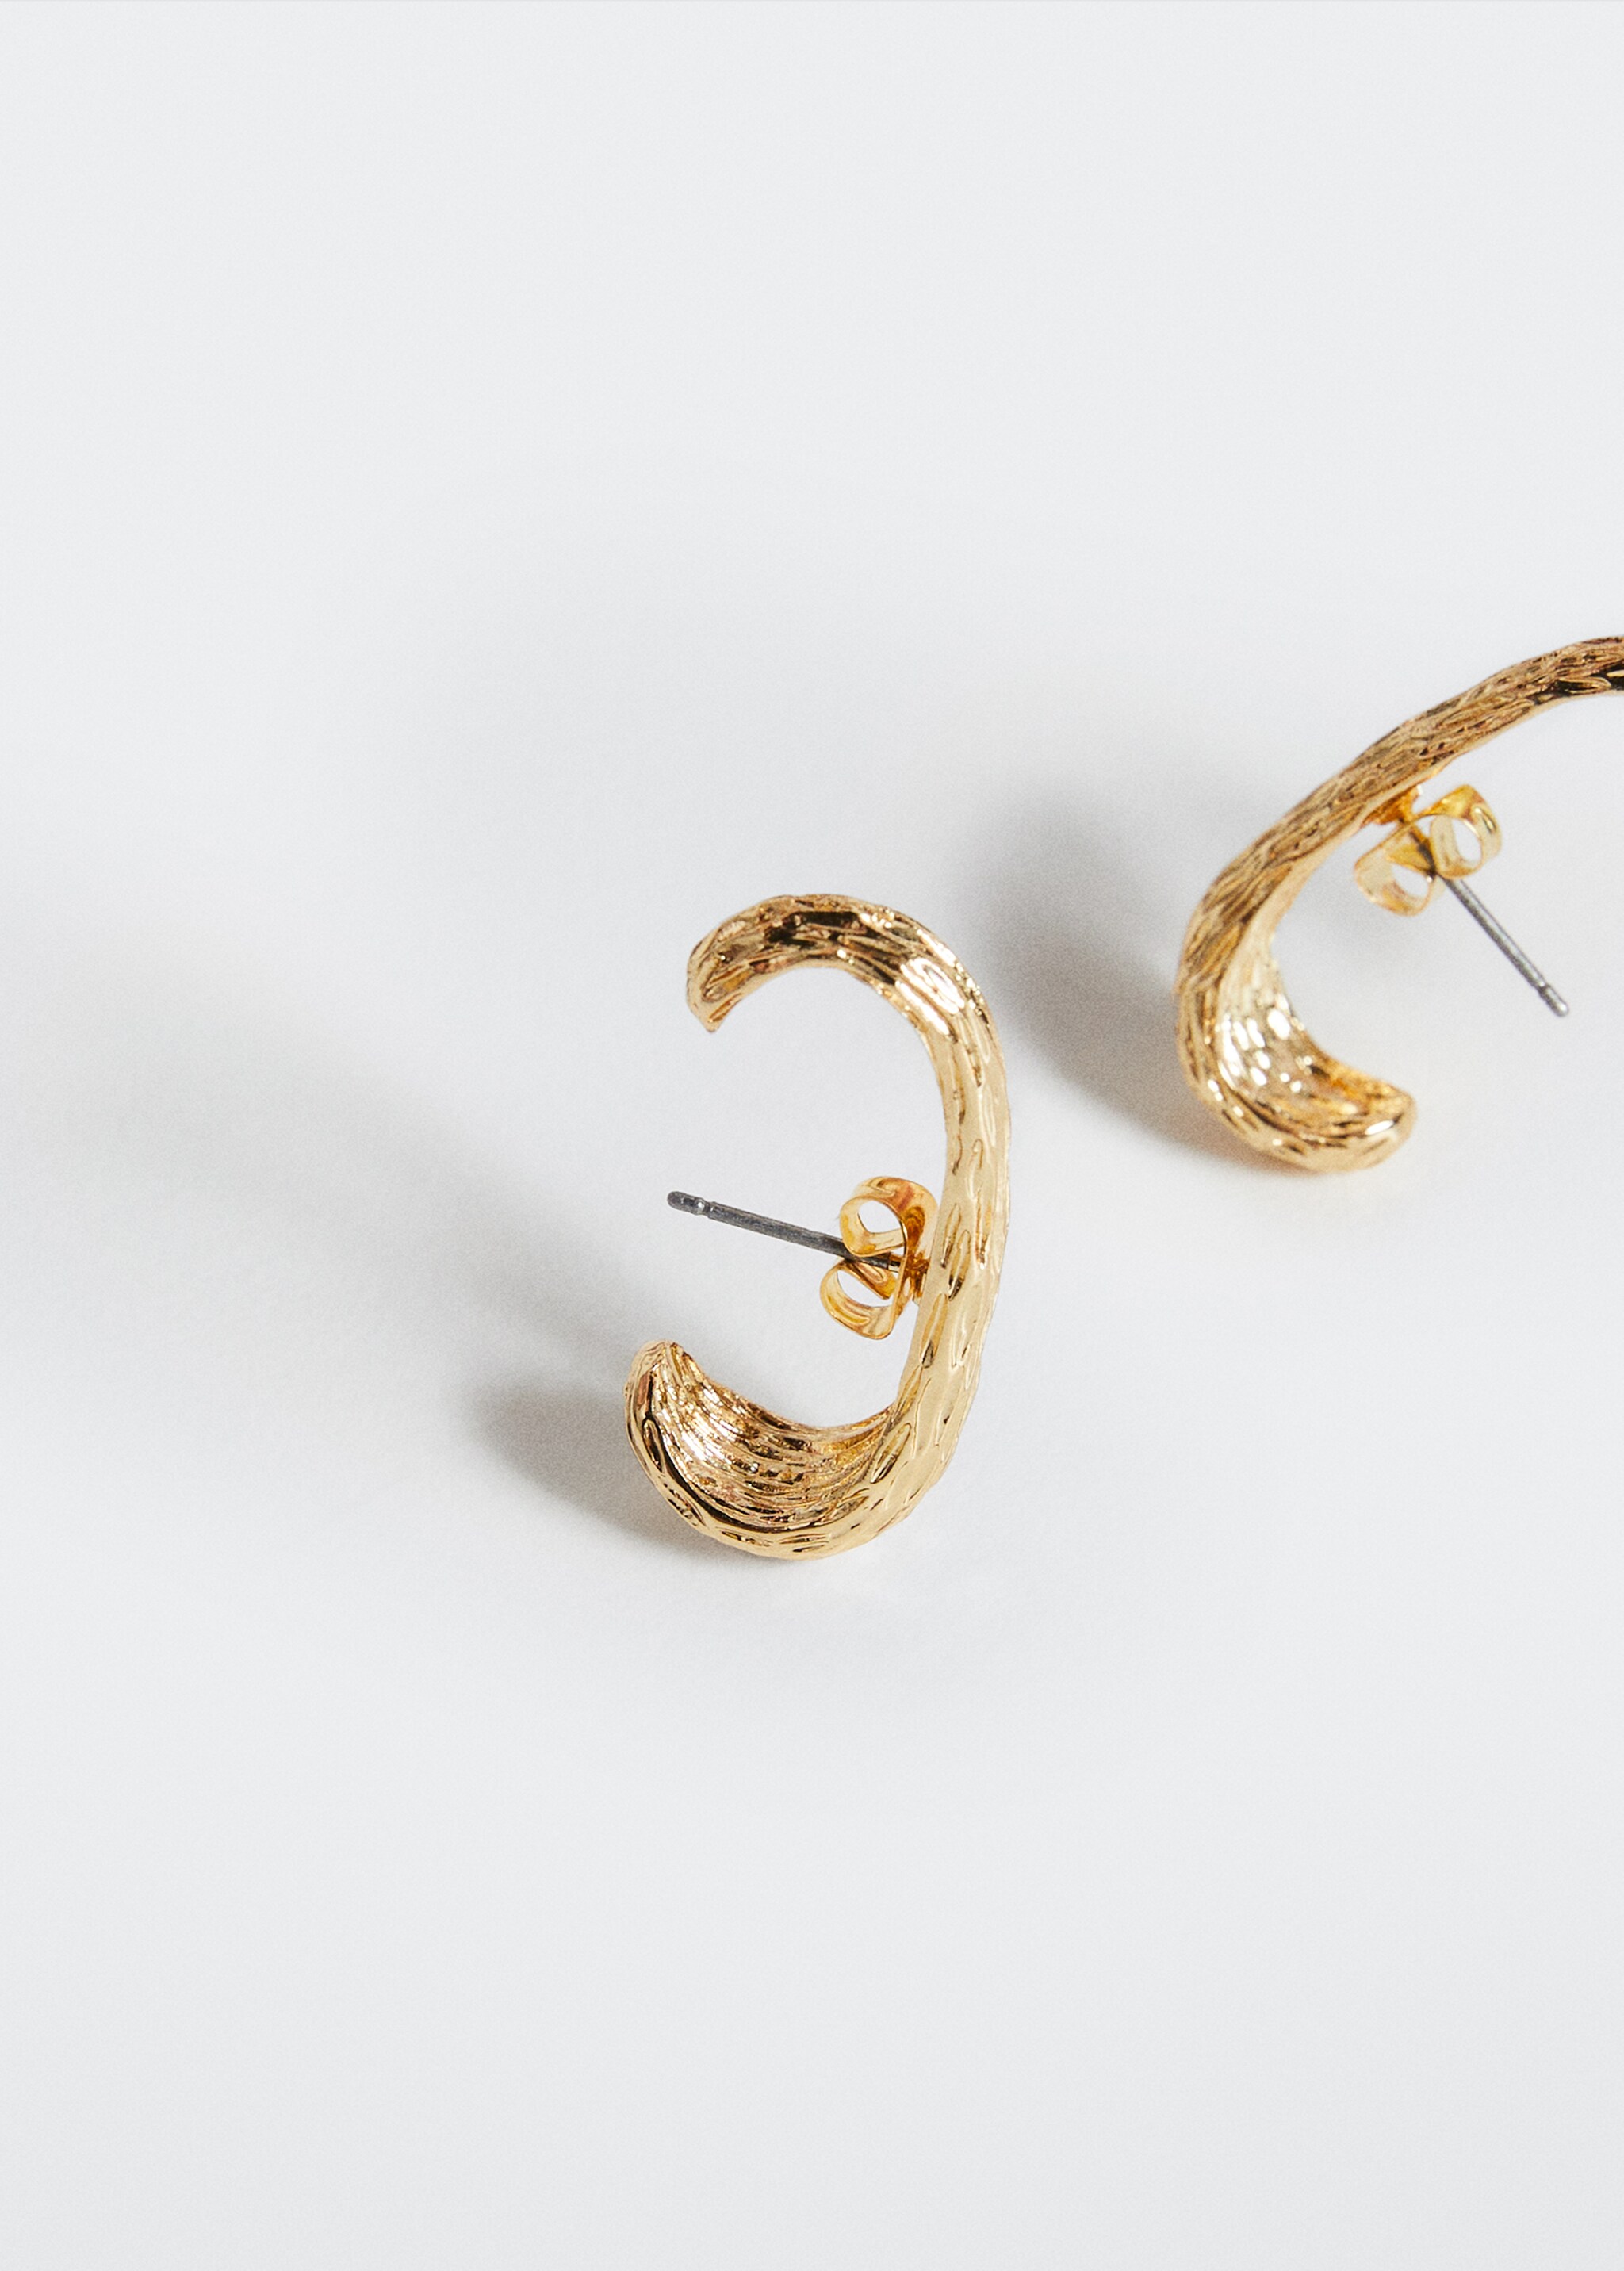 Textured earrings - Details of the article 2